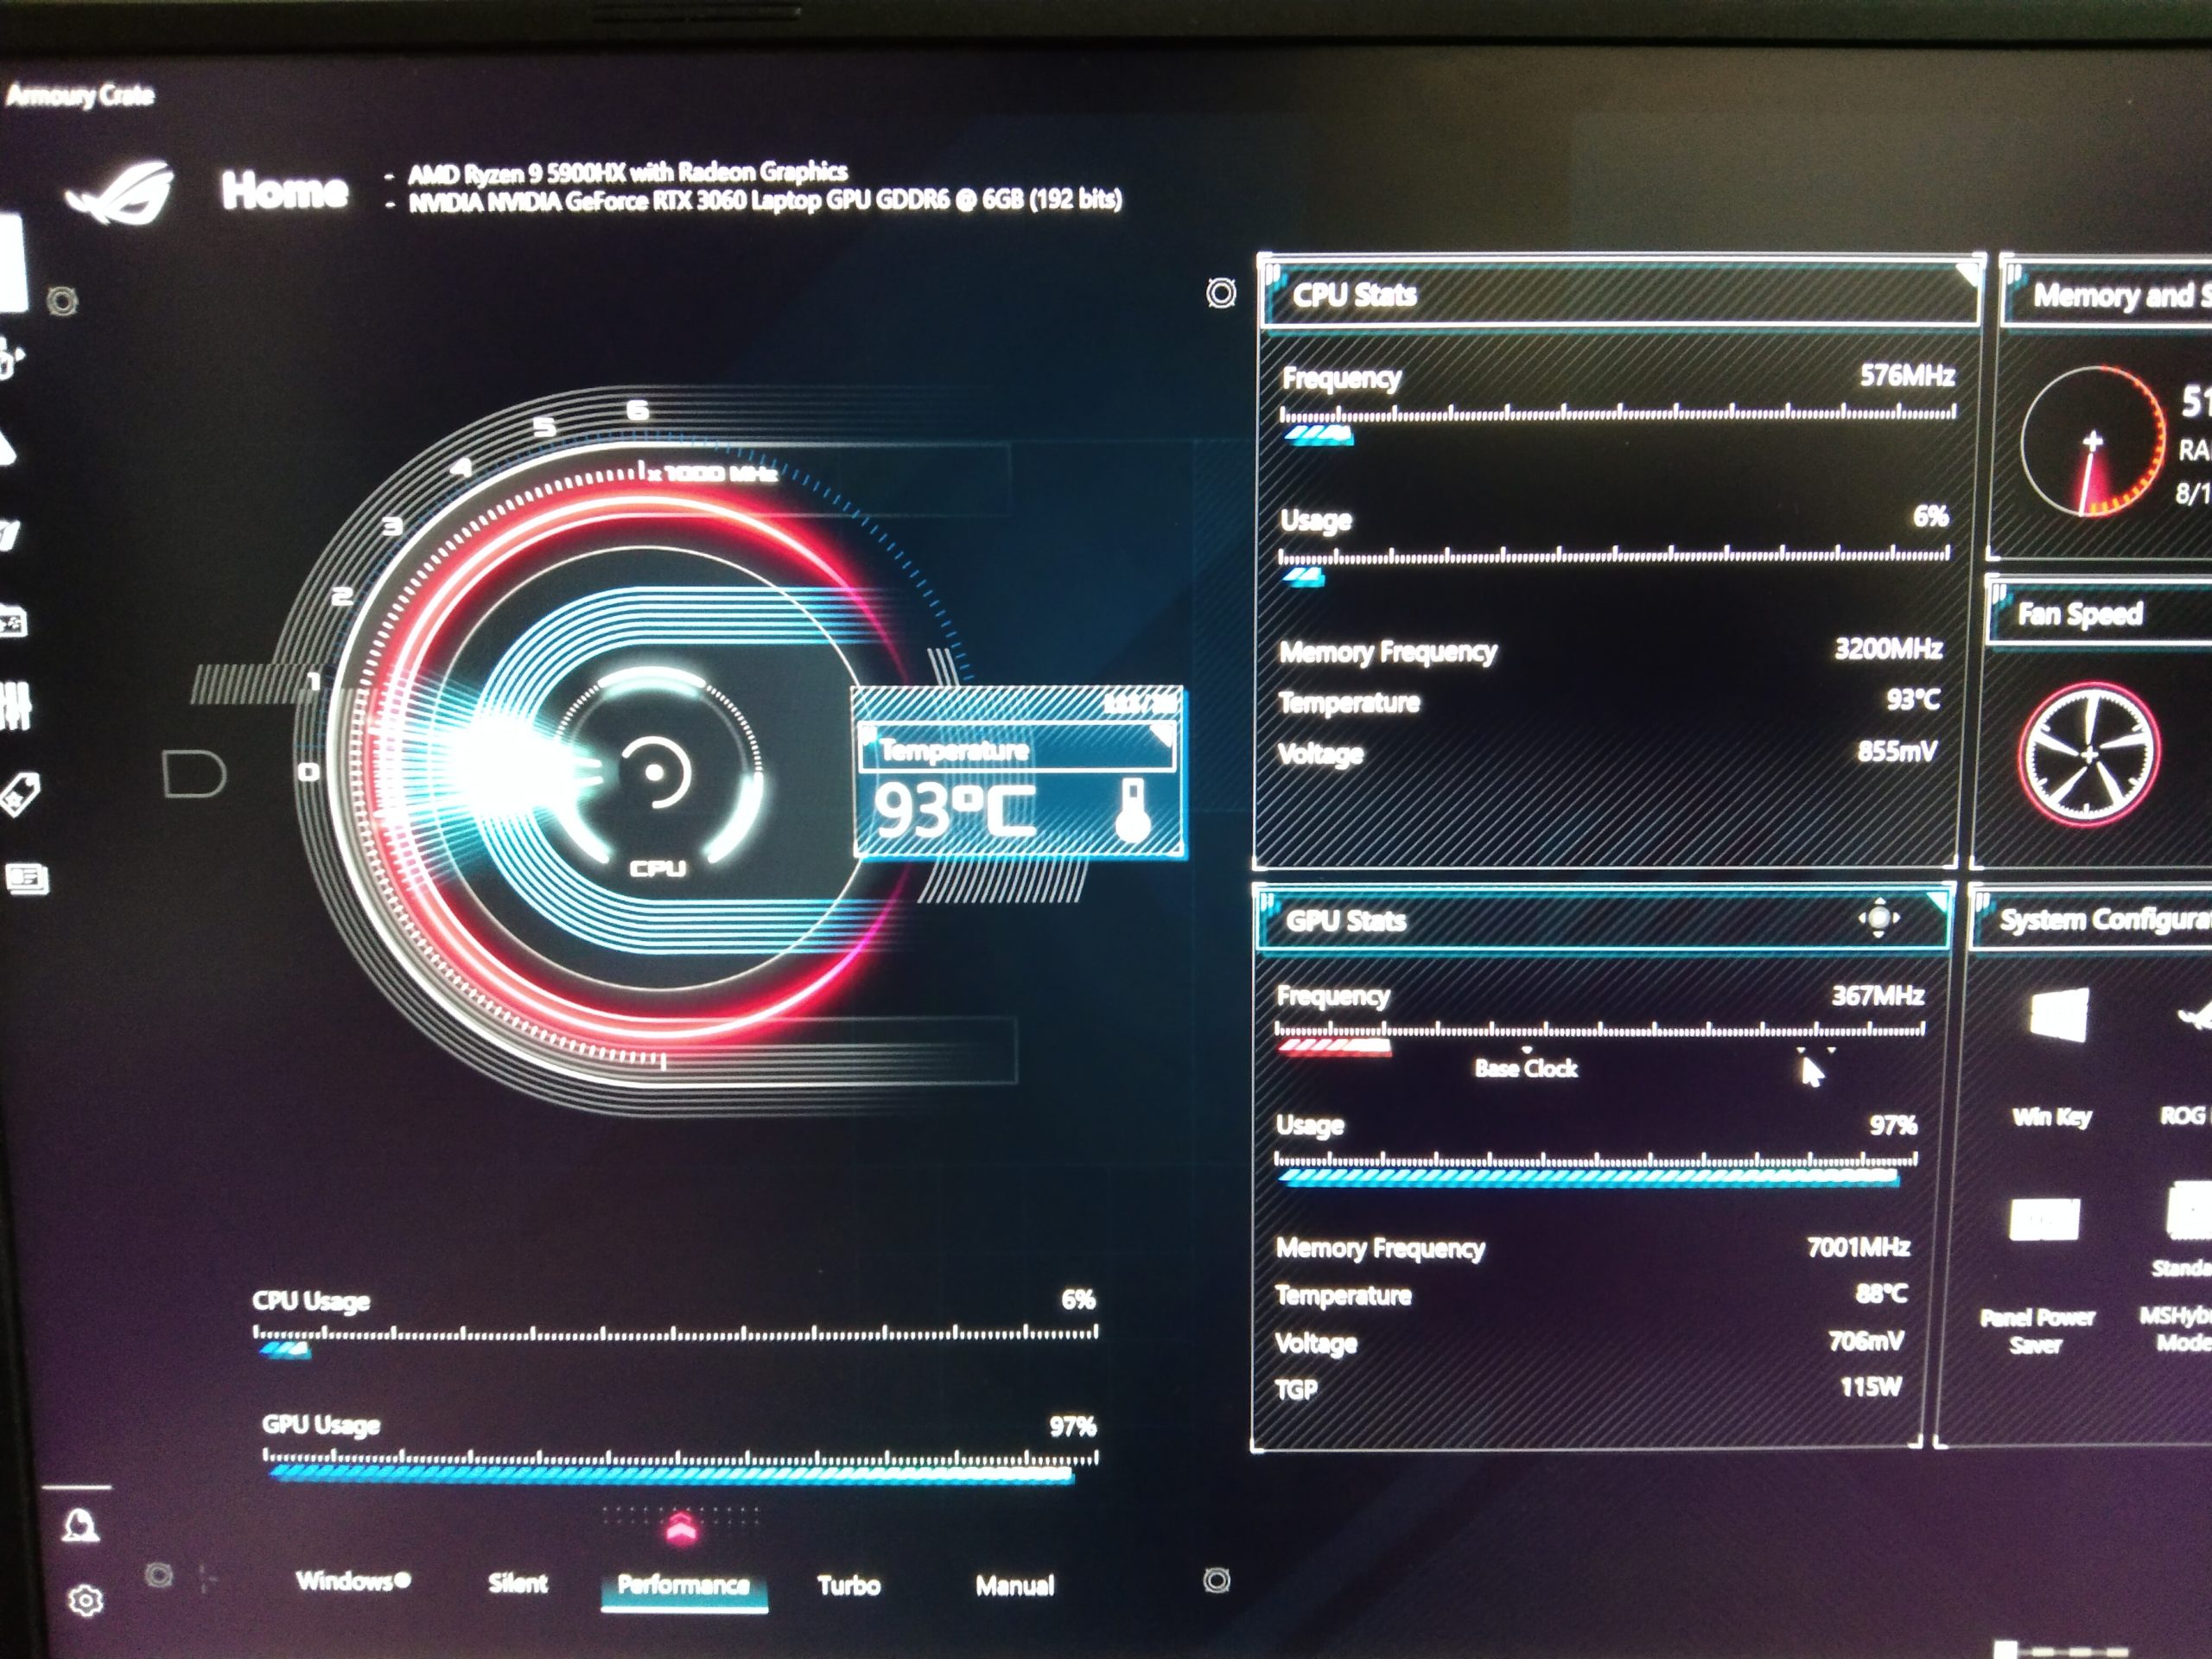 ASUS complaint Heating Issue